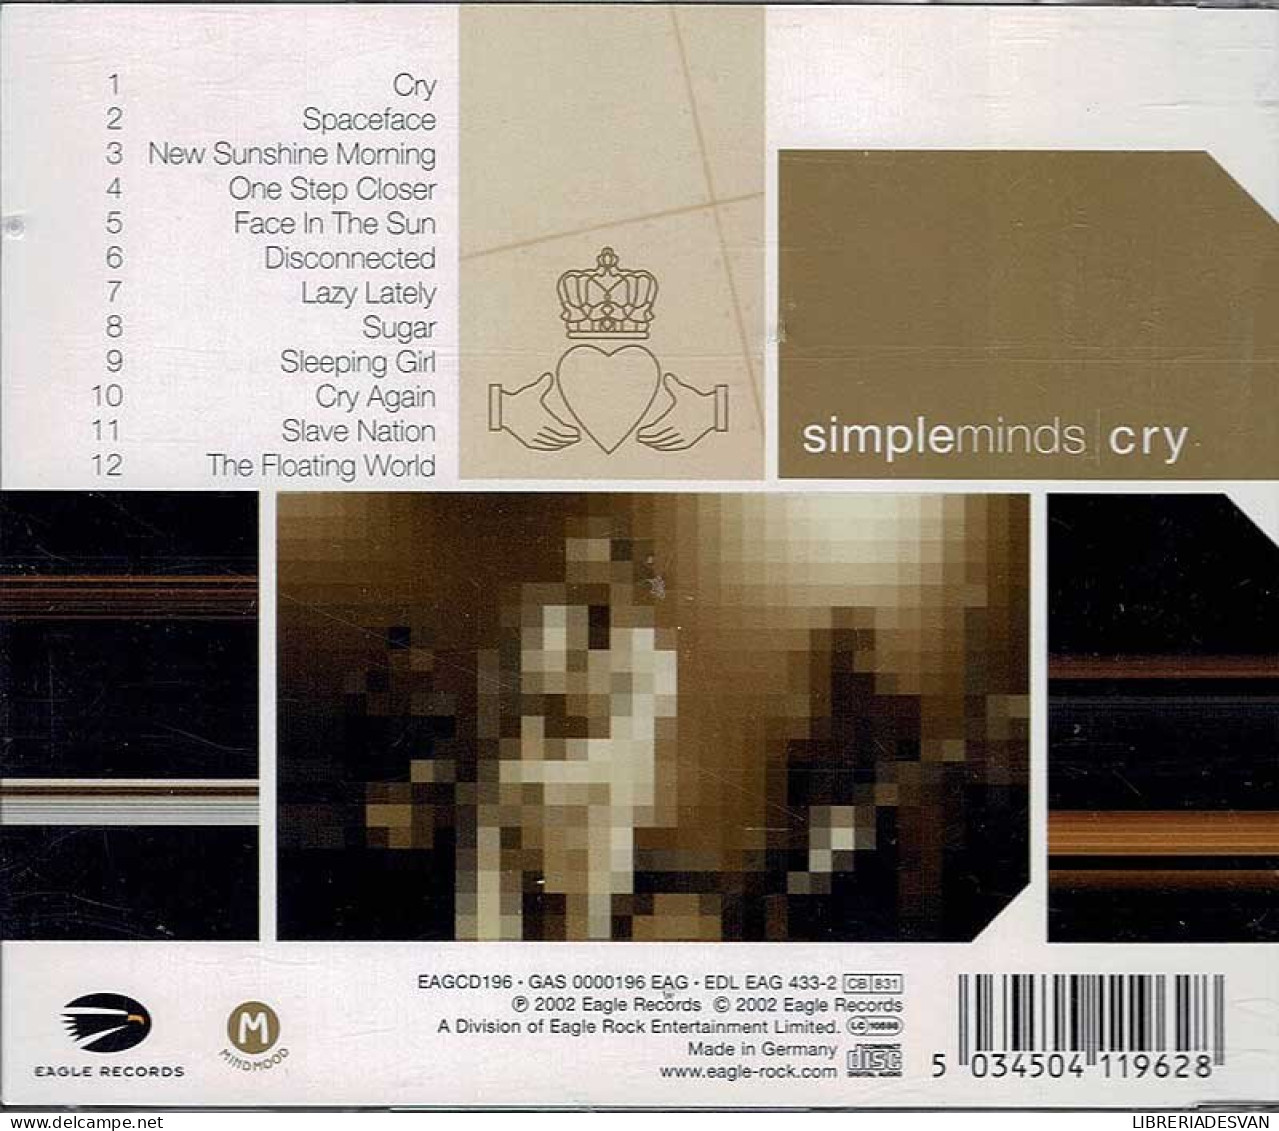 Simple Minds - Cry. CD - Disco, Pop